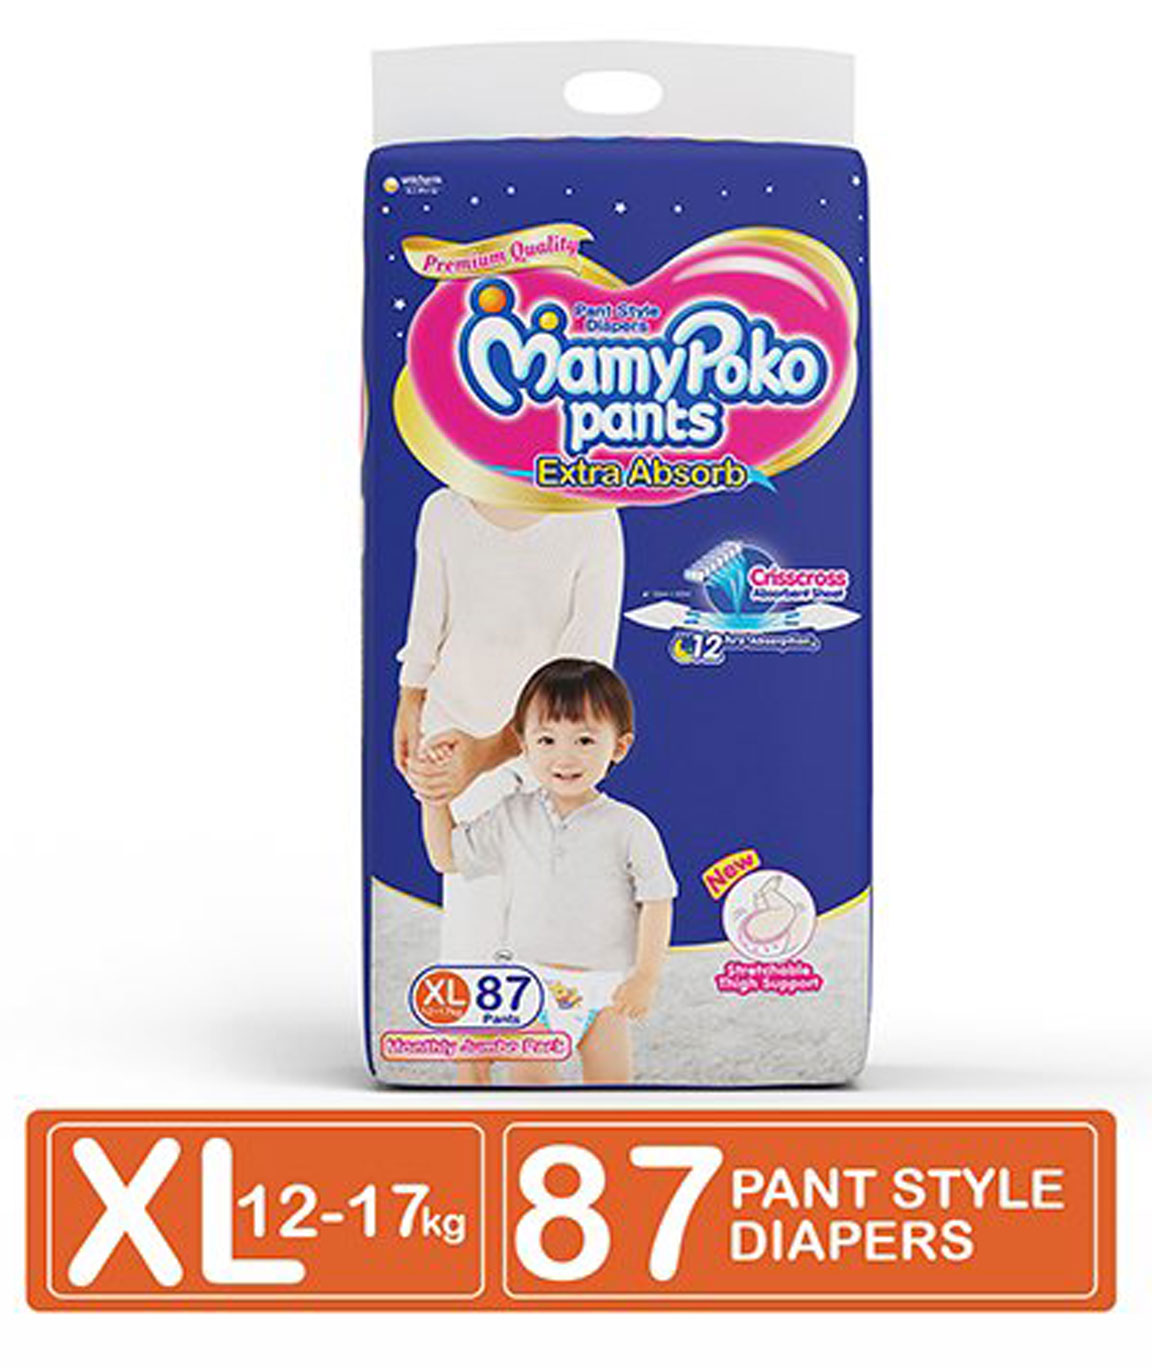 Amazon.com : Mamypoko Extra Absorb Xtra Large (12-17kg), 14 pcs Pouch :  Health & Household